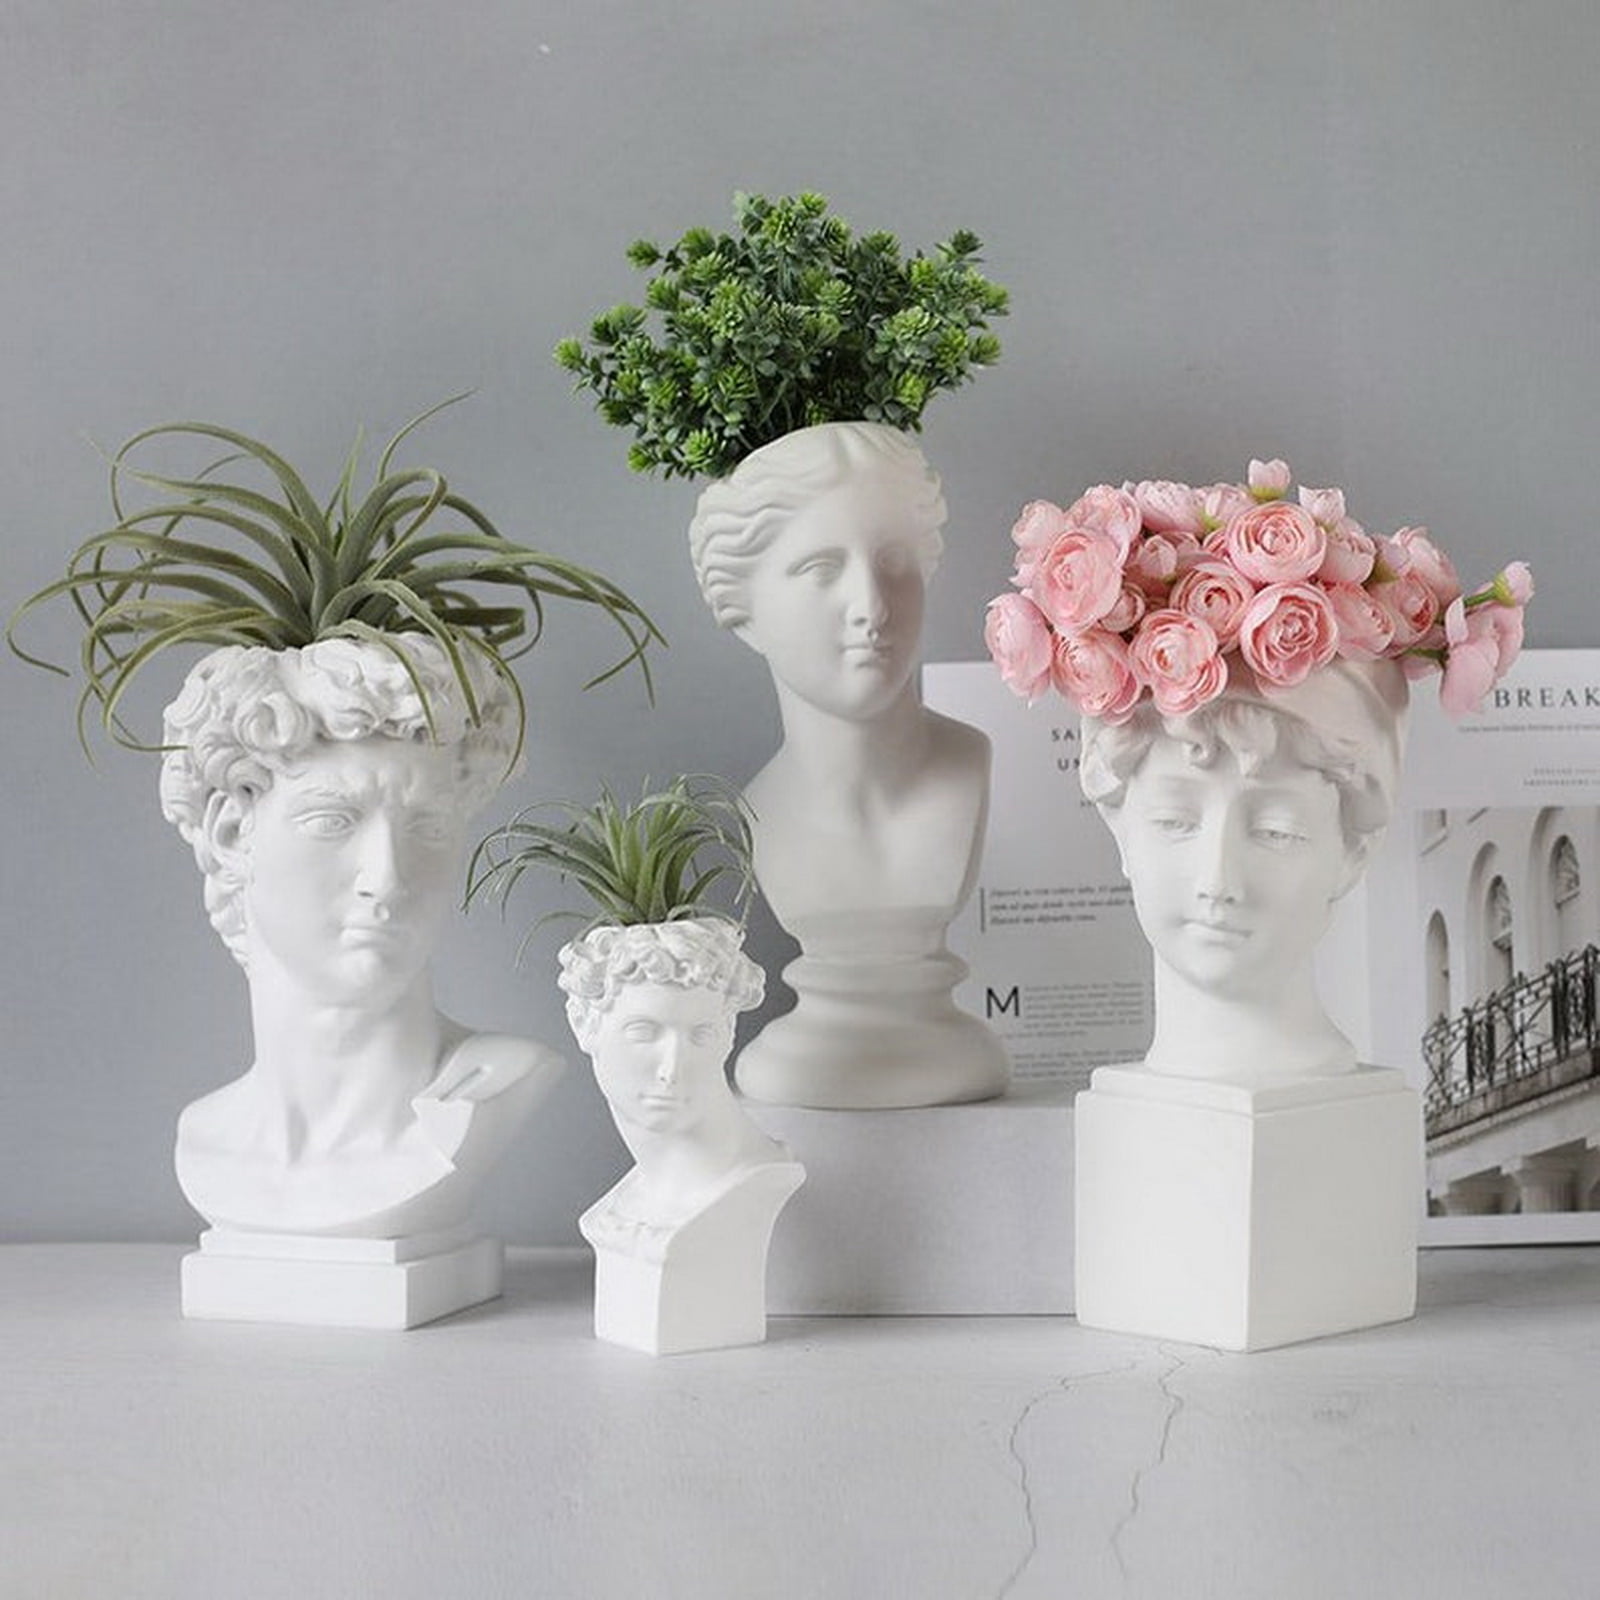 6.5x3.5inch/16.5x9cm WowFun Greek Roman Style Statue Flowers Vase Succulent Planter Great Gift for Home or Office Decoration Makeup Brushes Container Pen Holder David, Small 